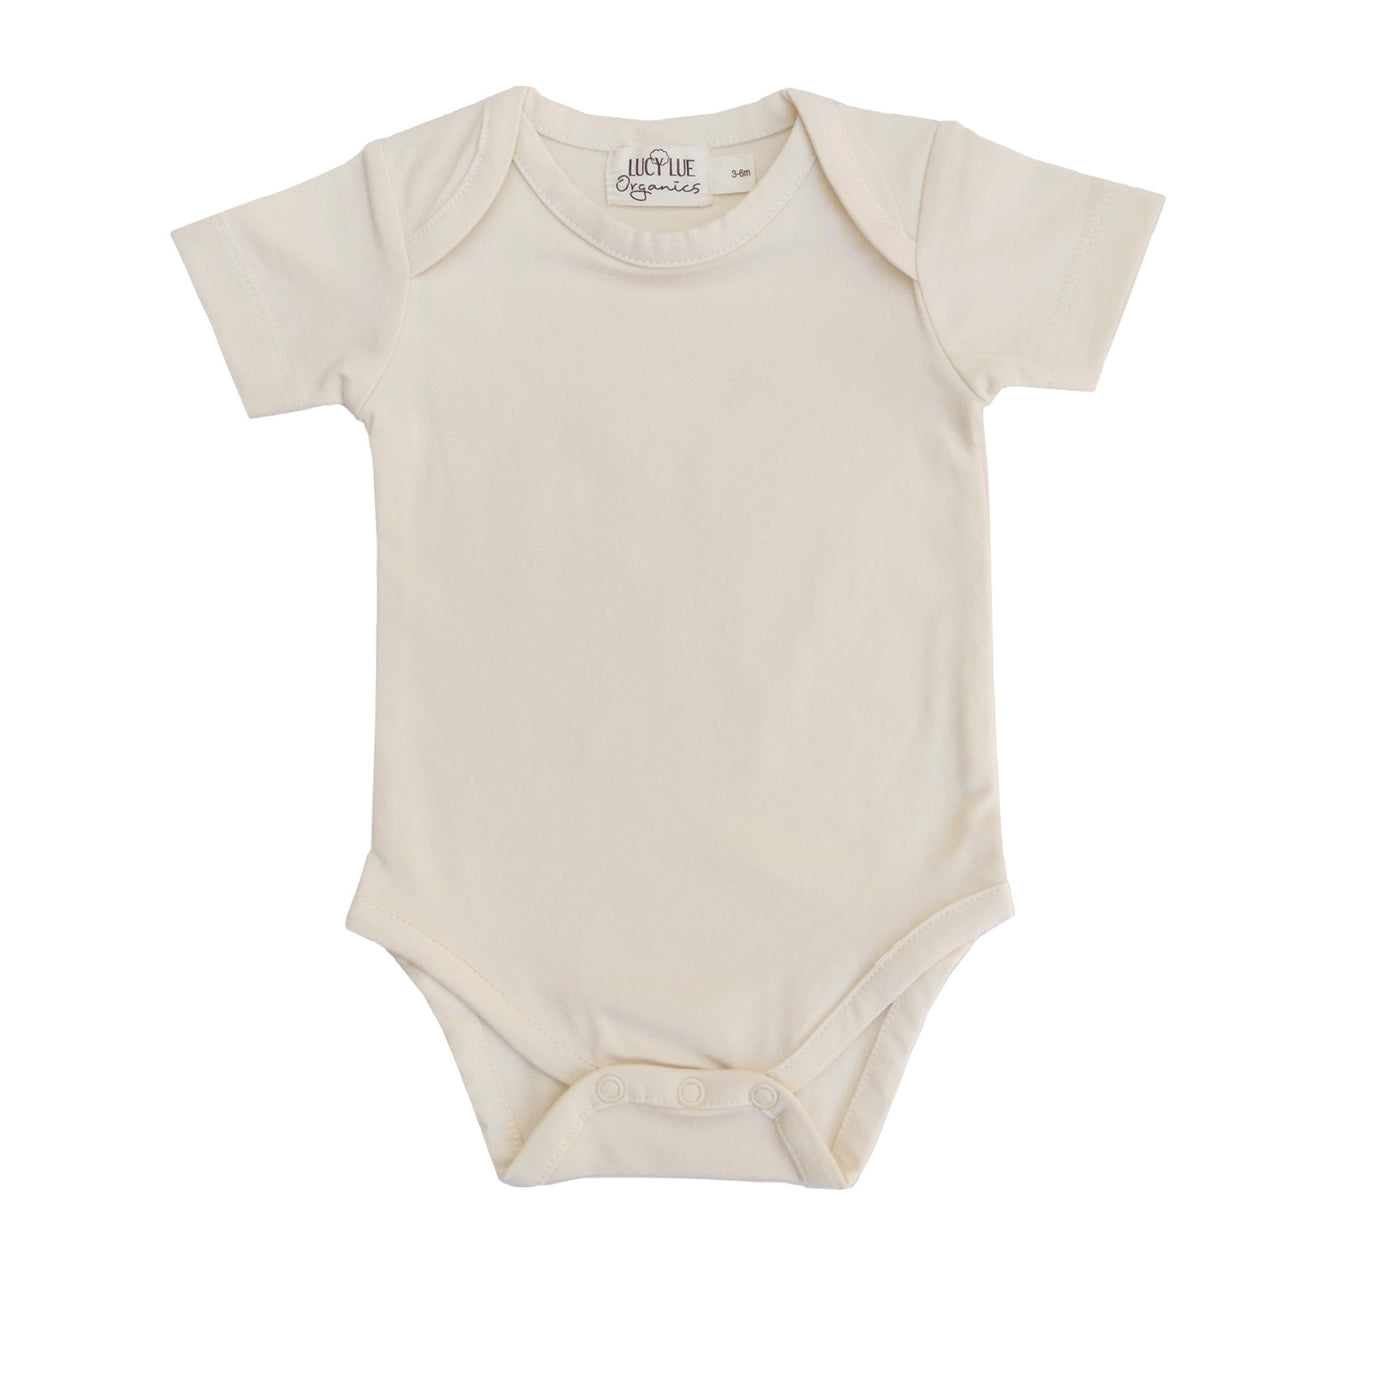 Gender Neutral Baby Clothing